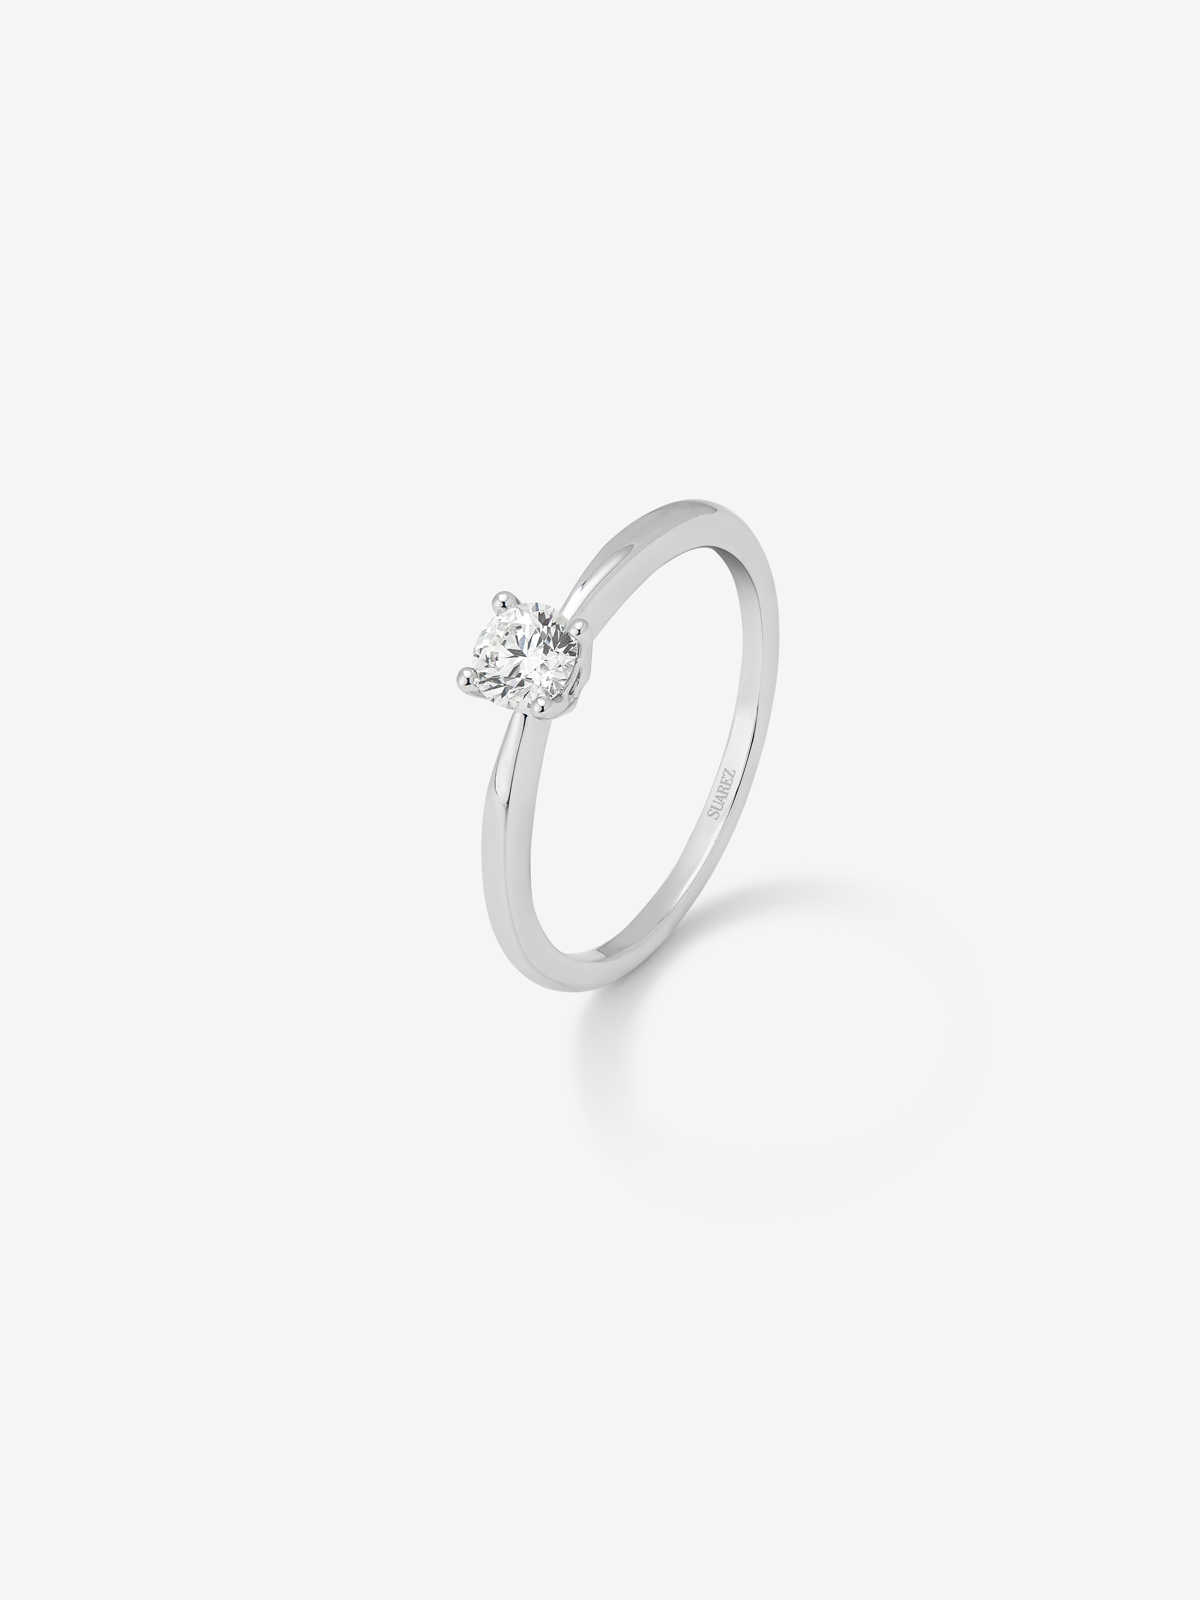 18K White Gold Commitment Ring with Diamond